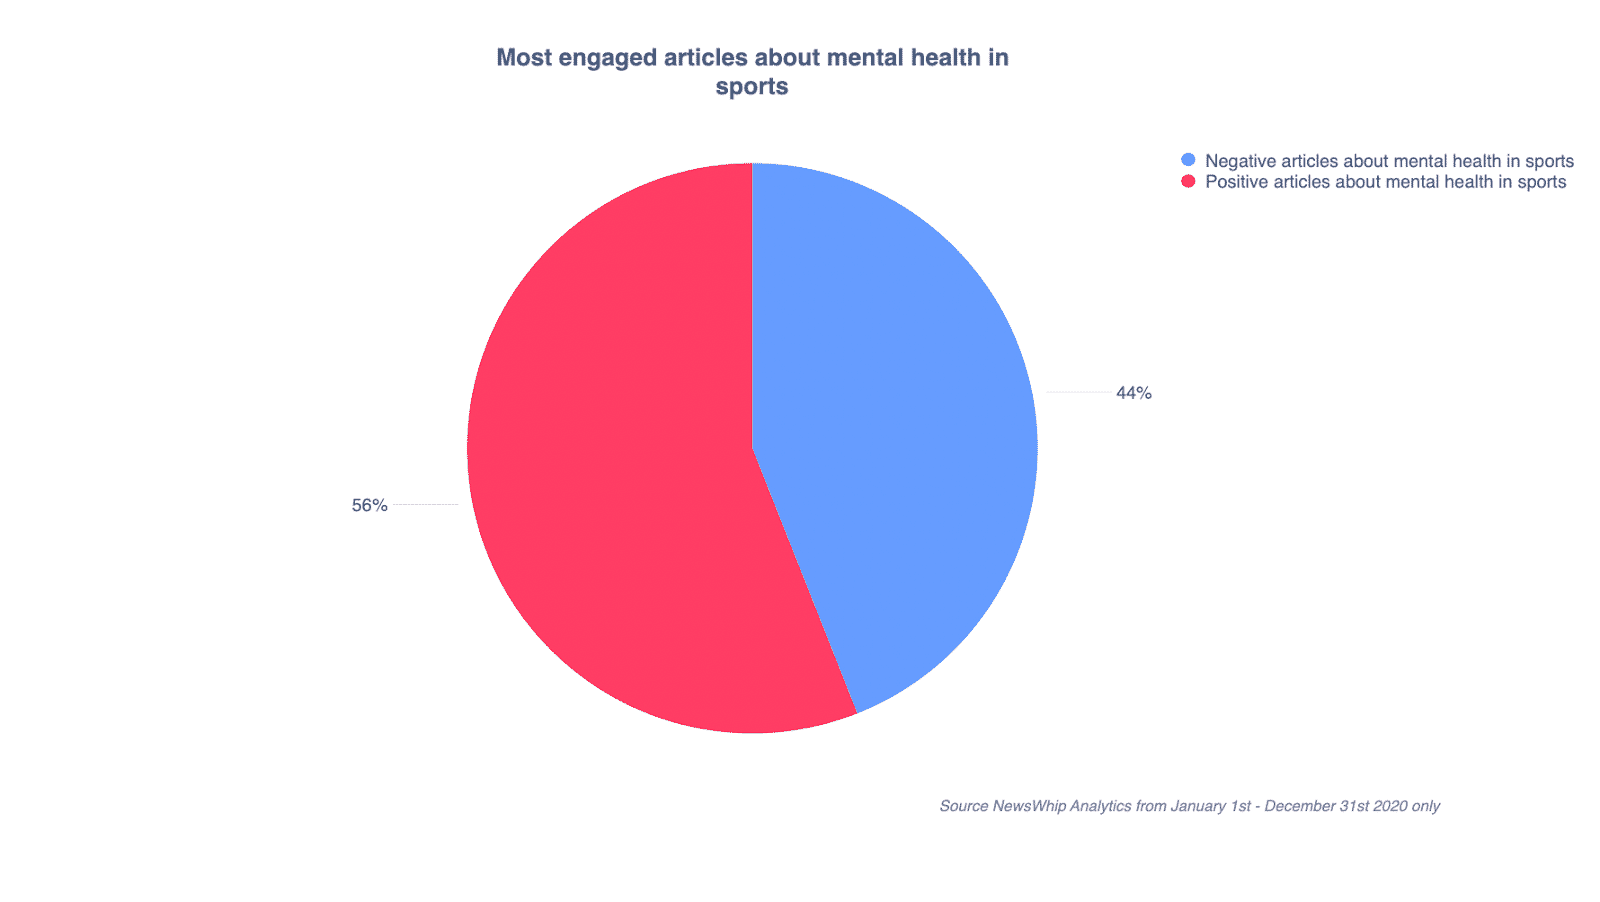 Graph showing the most engaged articles about mental health in sports